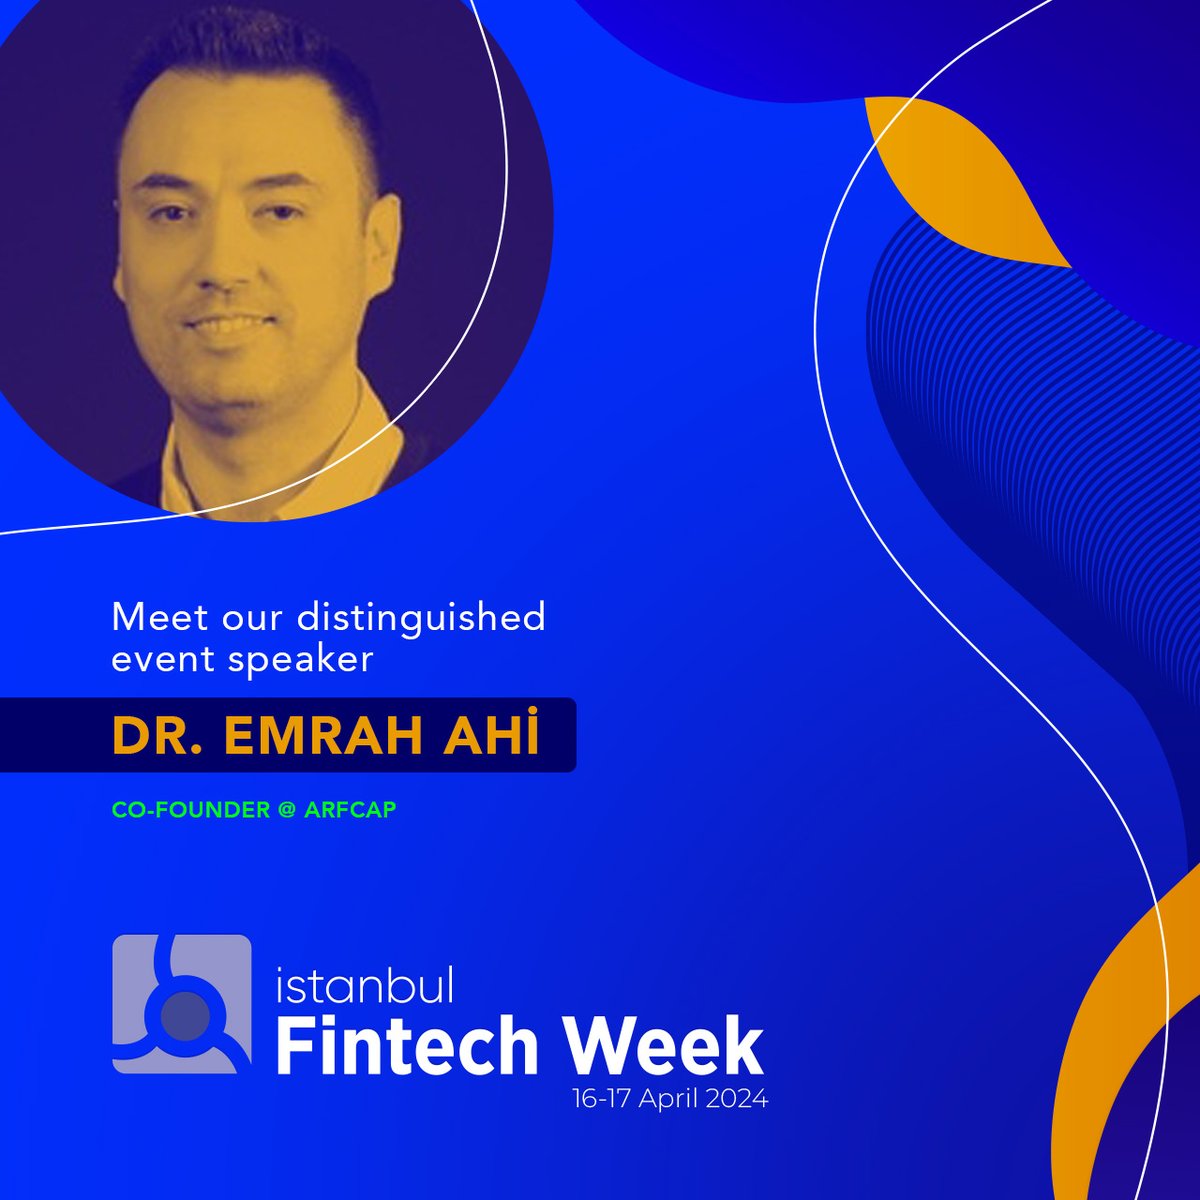 📢 Meet our distinguished event speaker, Emrah Ahi! Our speaker is the Co-Founder of ArfCap, a company that provides quant solutions for institutional investors using financial engineering, advanced analytics, and state-of-the-art A.I. technologies! He is also an academic